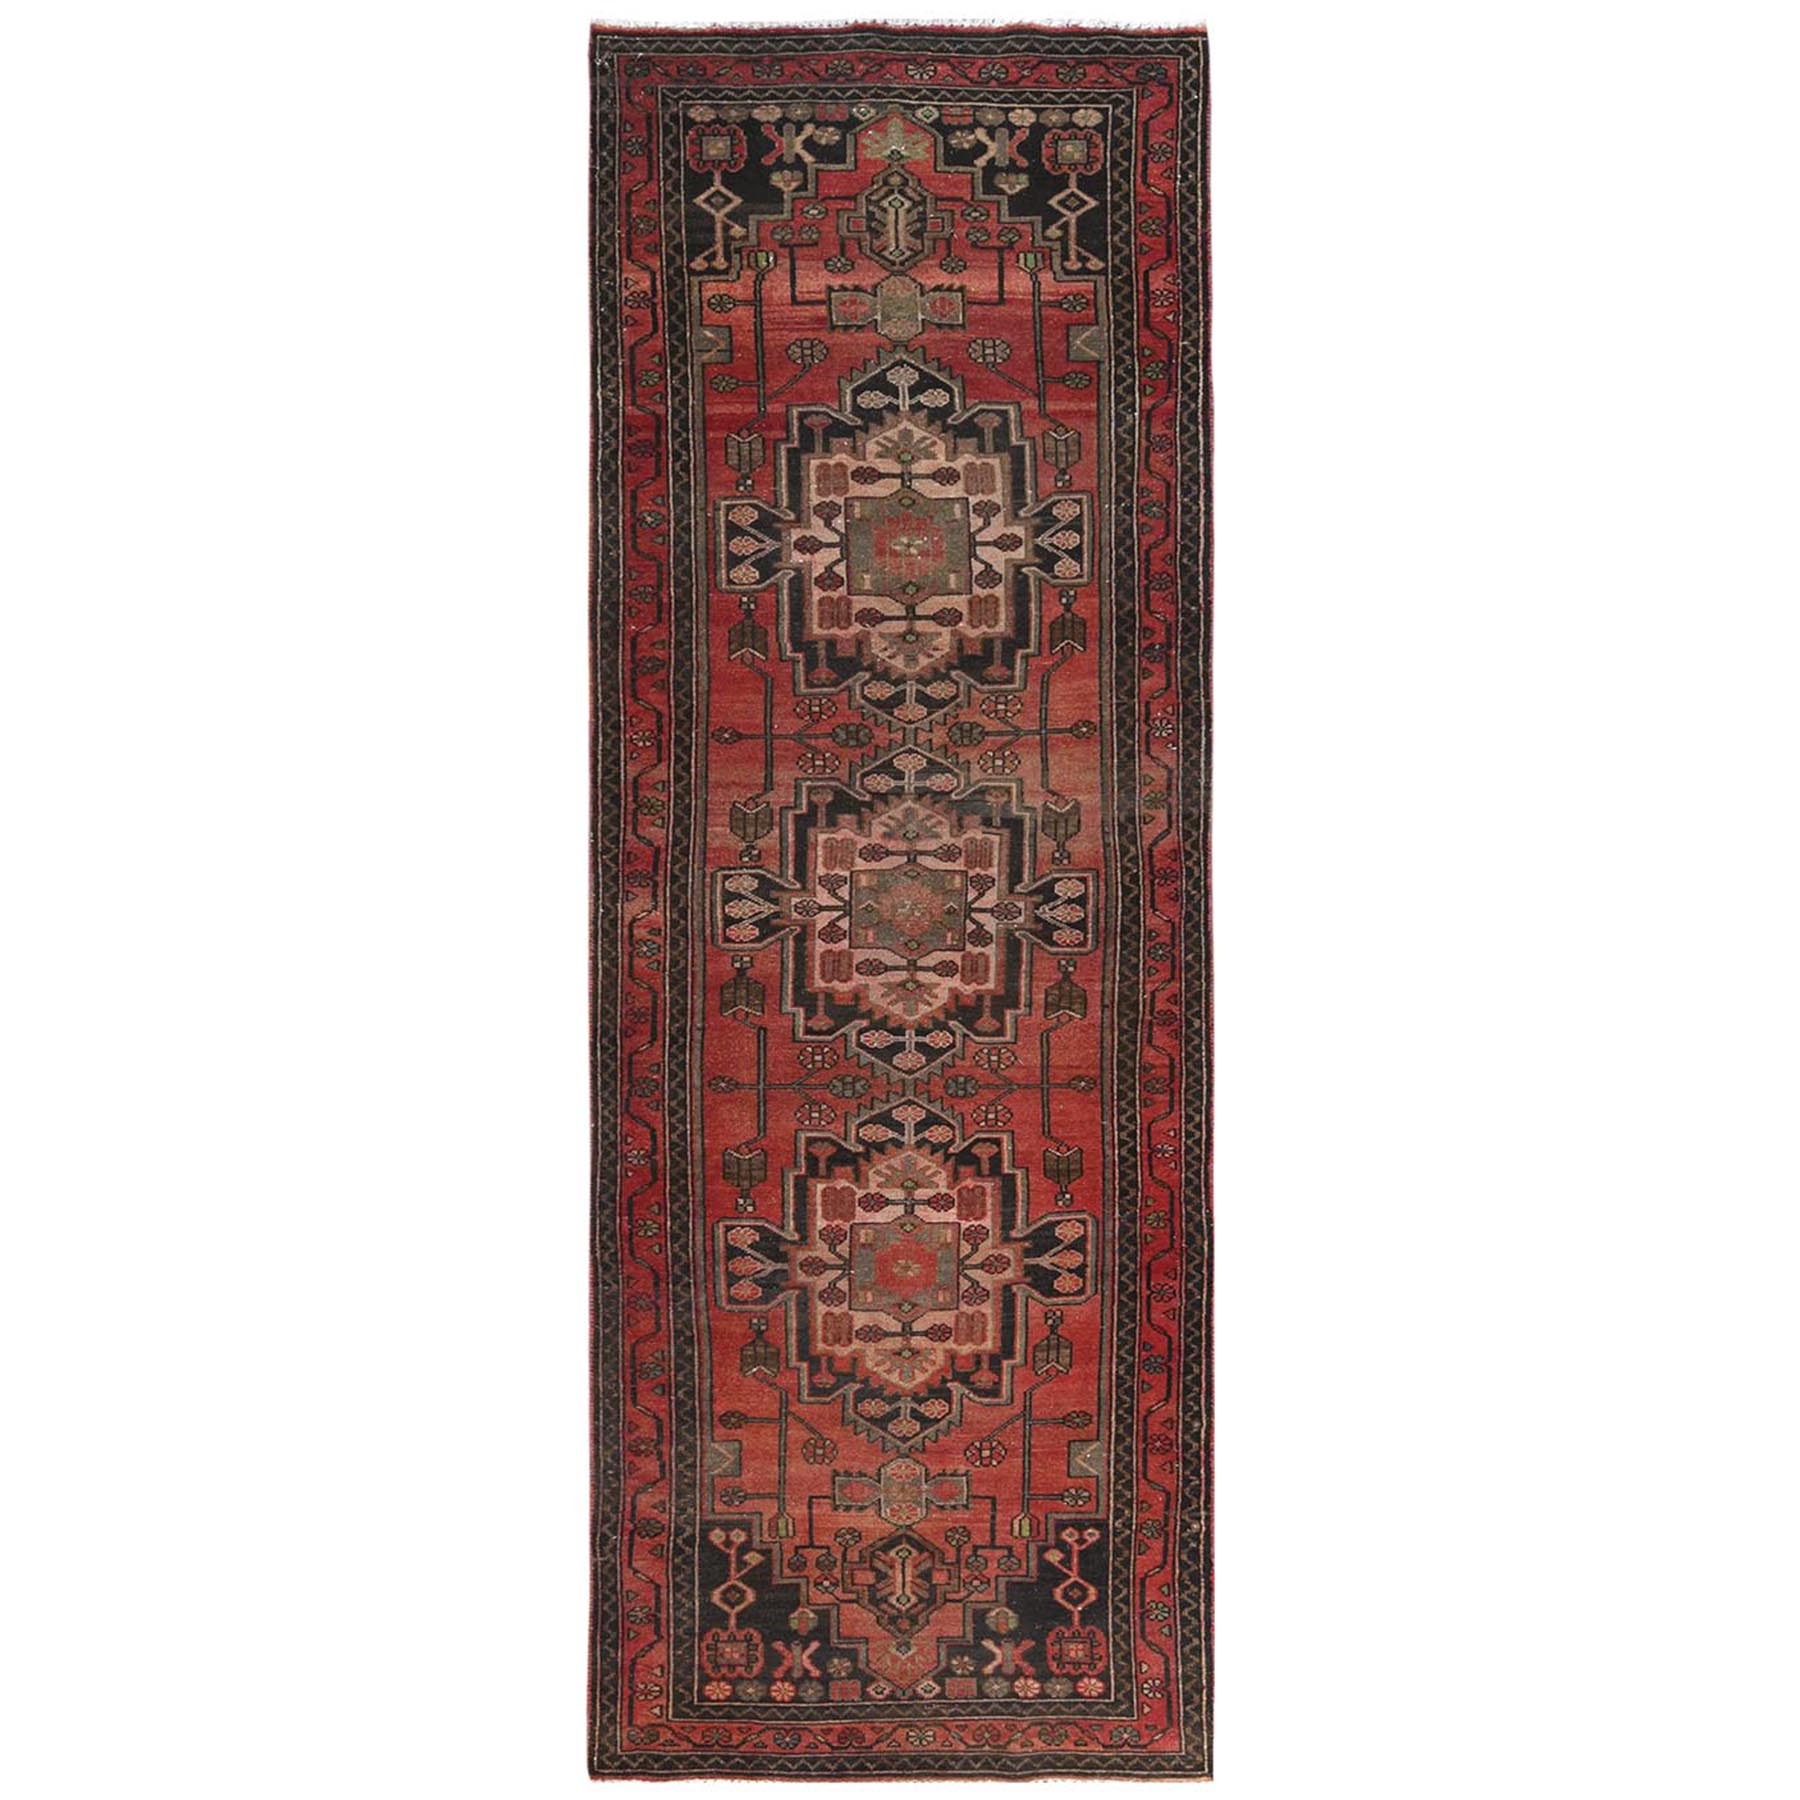 3'4"x10' Light Red with Touches of Chocolate Brown, Distressed Look Vintage Persian Hamadan, Hand Woven, Pure Wool, Worn Down, Wide Runner Oriental Rug 